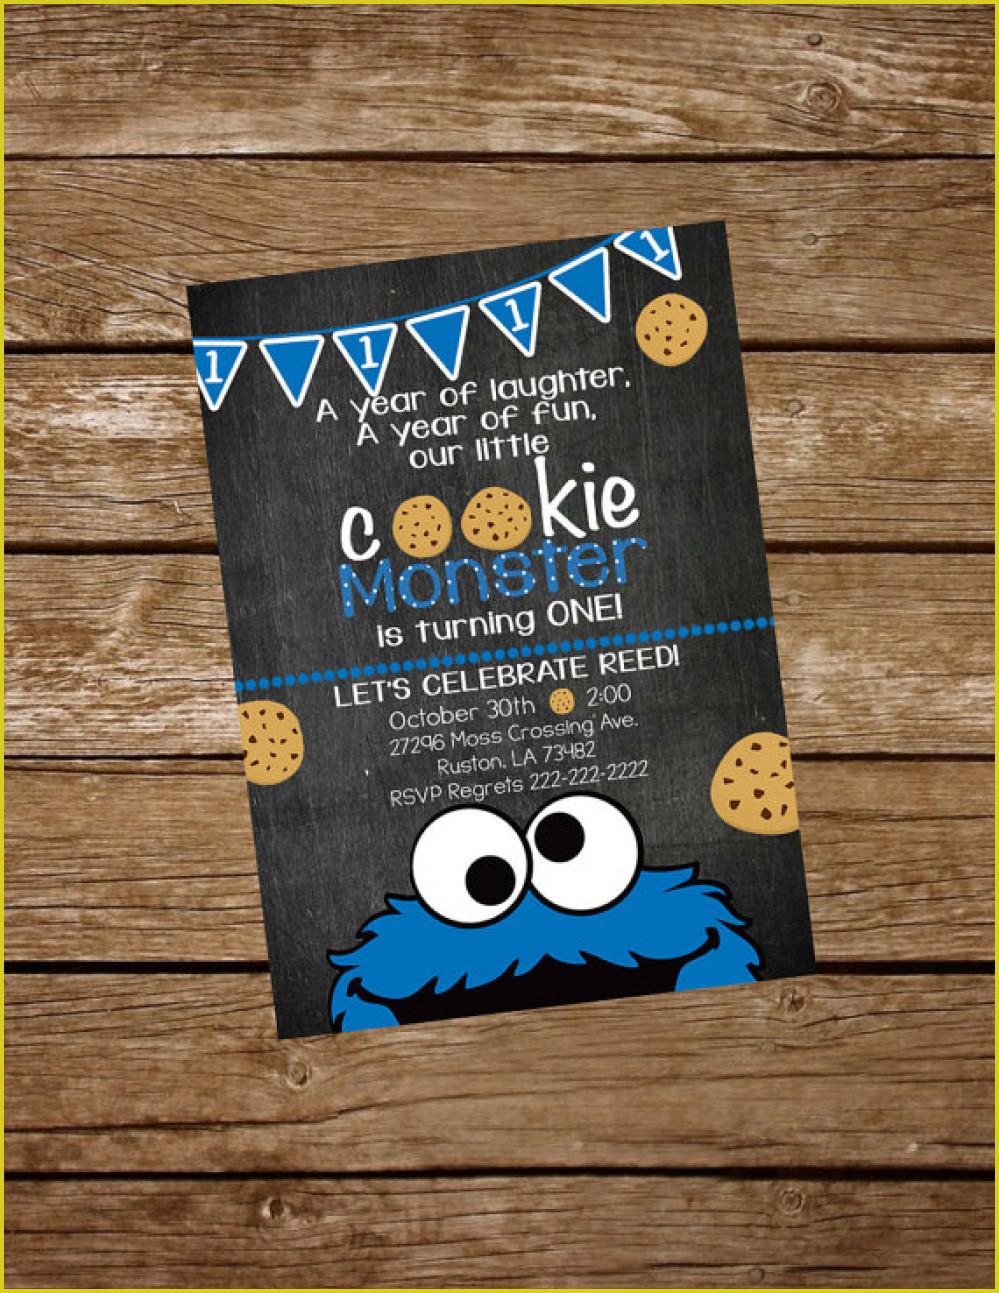 Elegant Cookie Monster Birthday Invitations Which Can Be Used As - Free Printable Cookie Monster Birthday Invitations